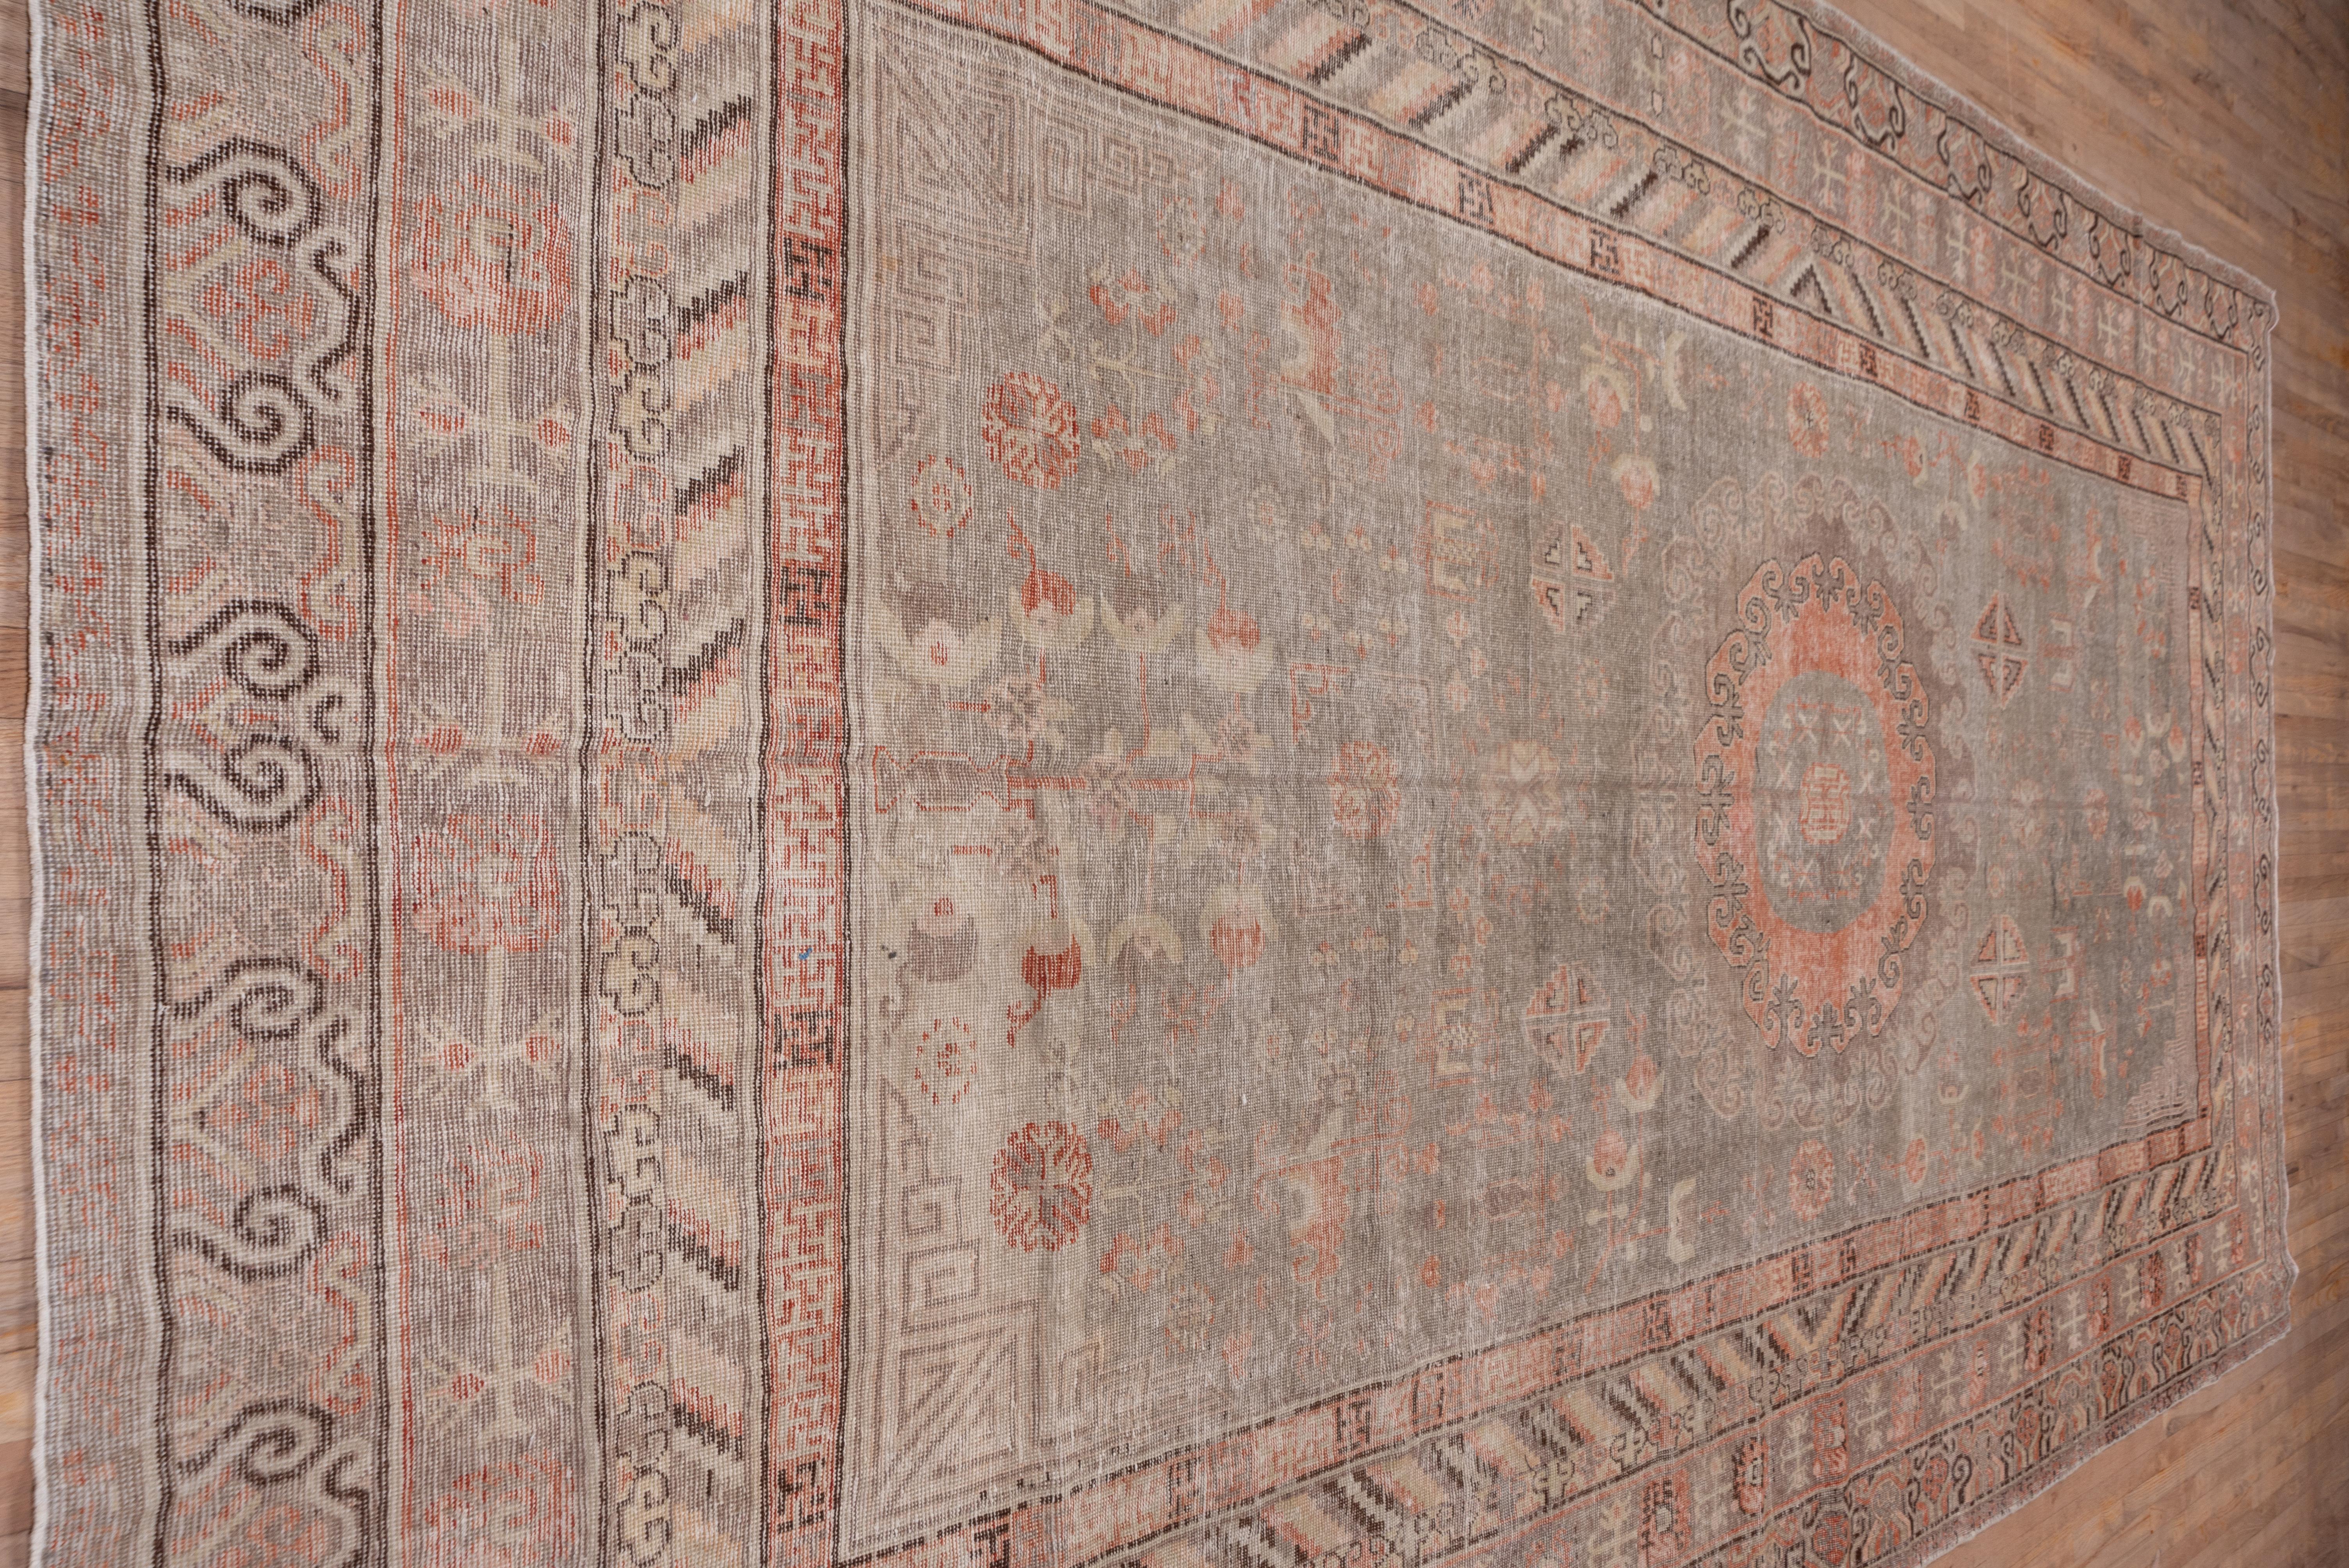 This mellow ton Xinjiang oasis town carpet features a double concentric round medallion with a reciprocal edge on the buff ground. Chinese style fret corners, small divided octagons and bent leaves adorn the field of this worn flat piece with a